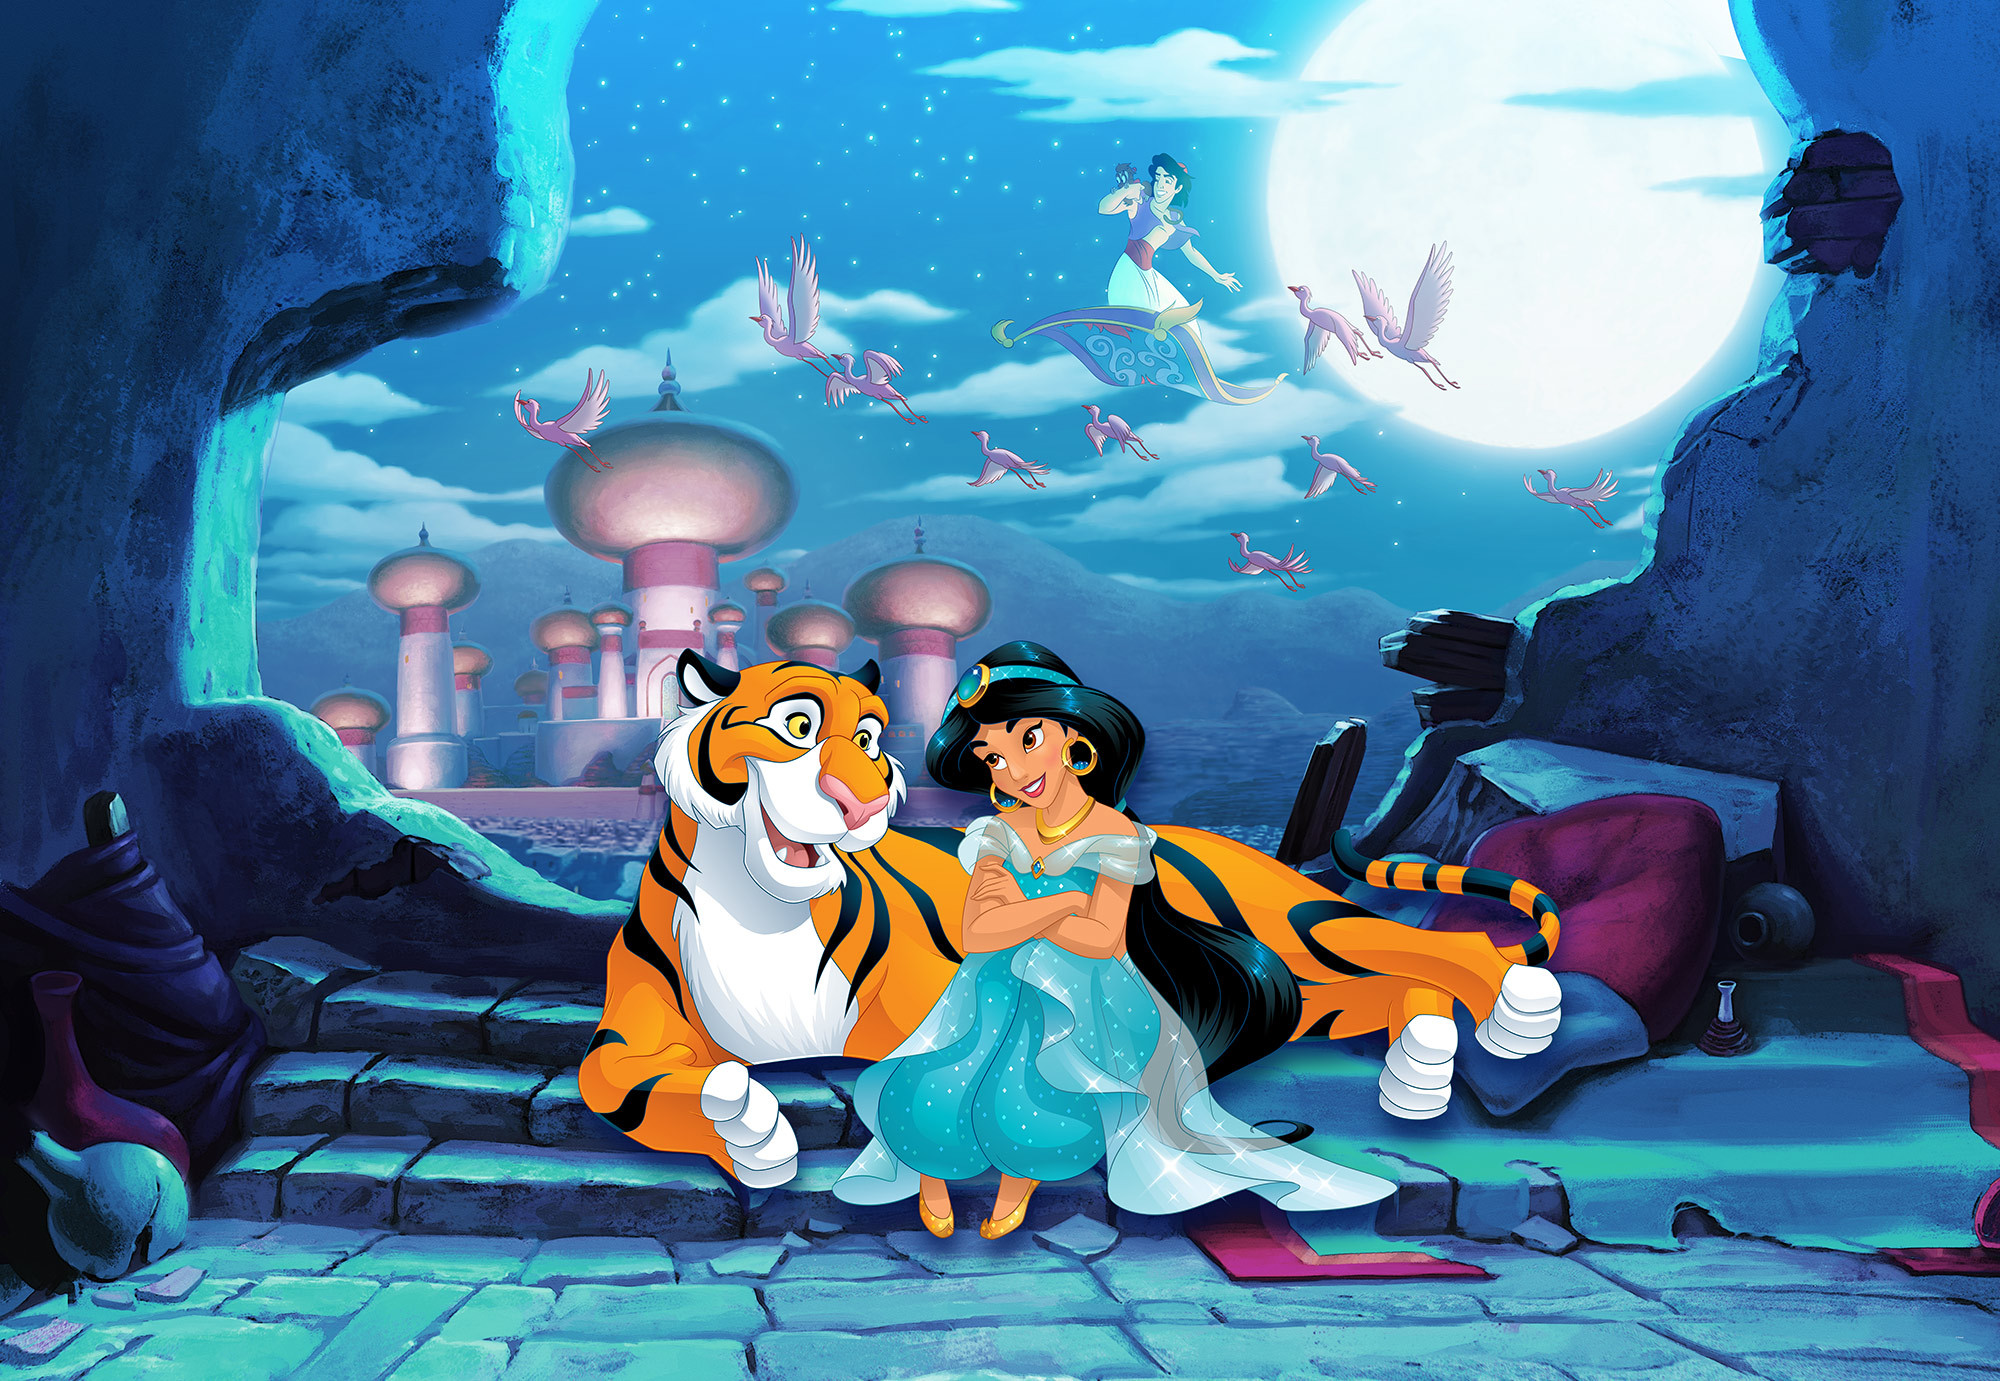 Princess Jasmine Aladdin - Animations Paint By Numbers - Painting By Numbers